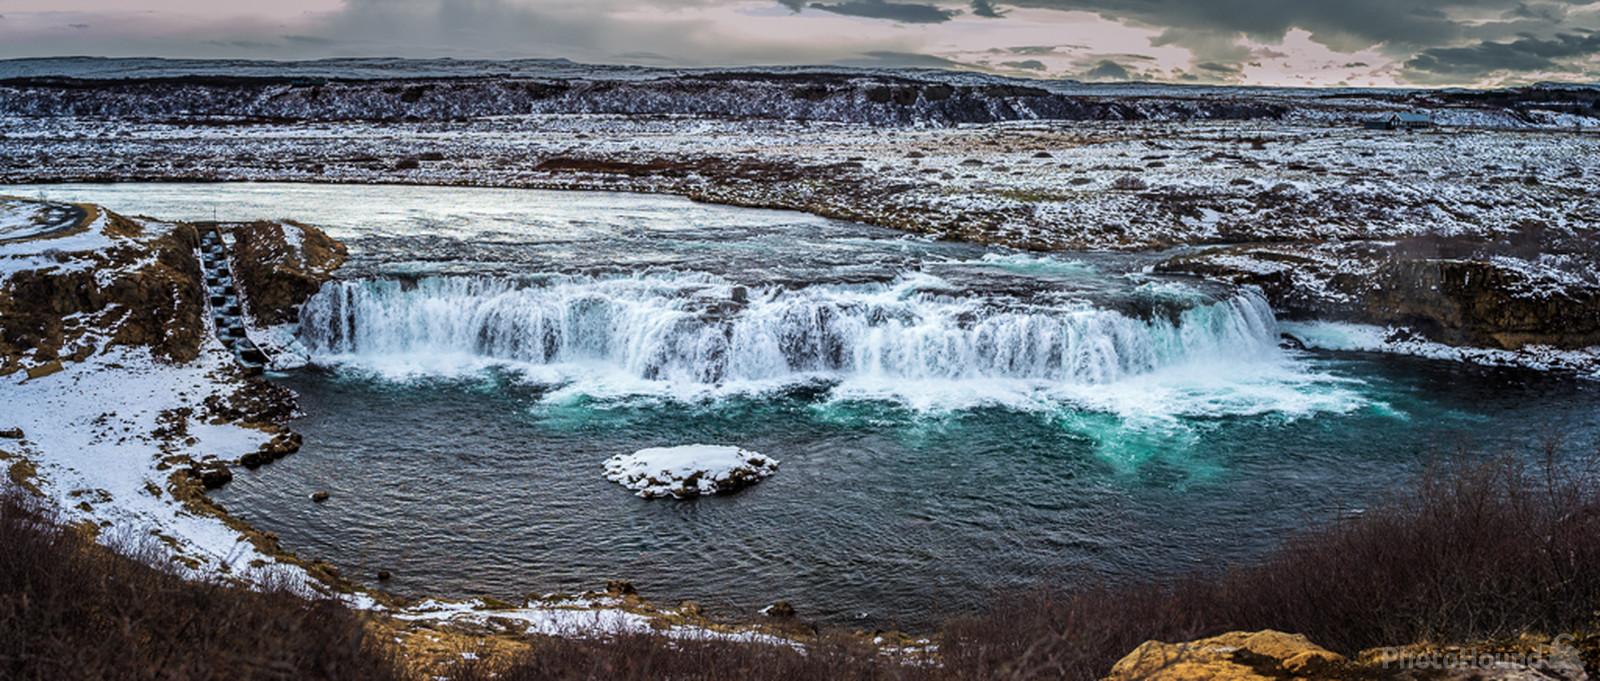 Image of Faxifoss Waterfall by James Billings.